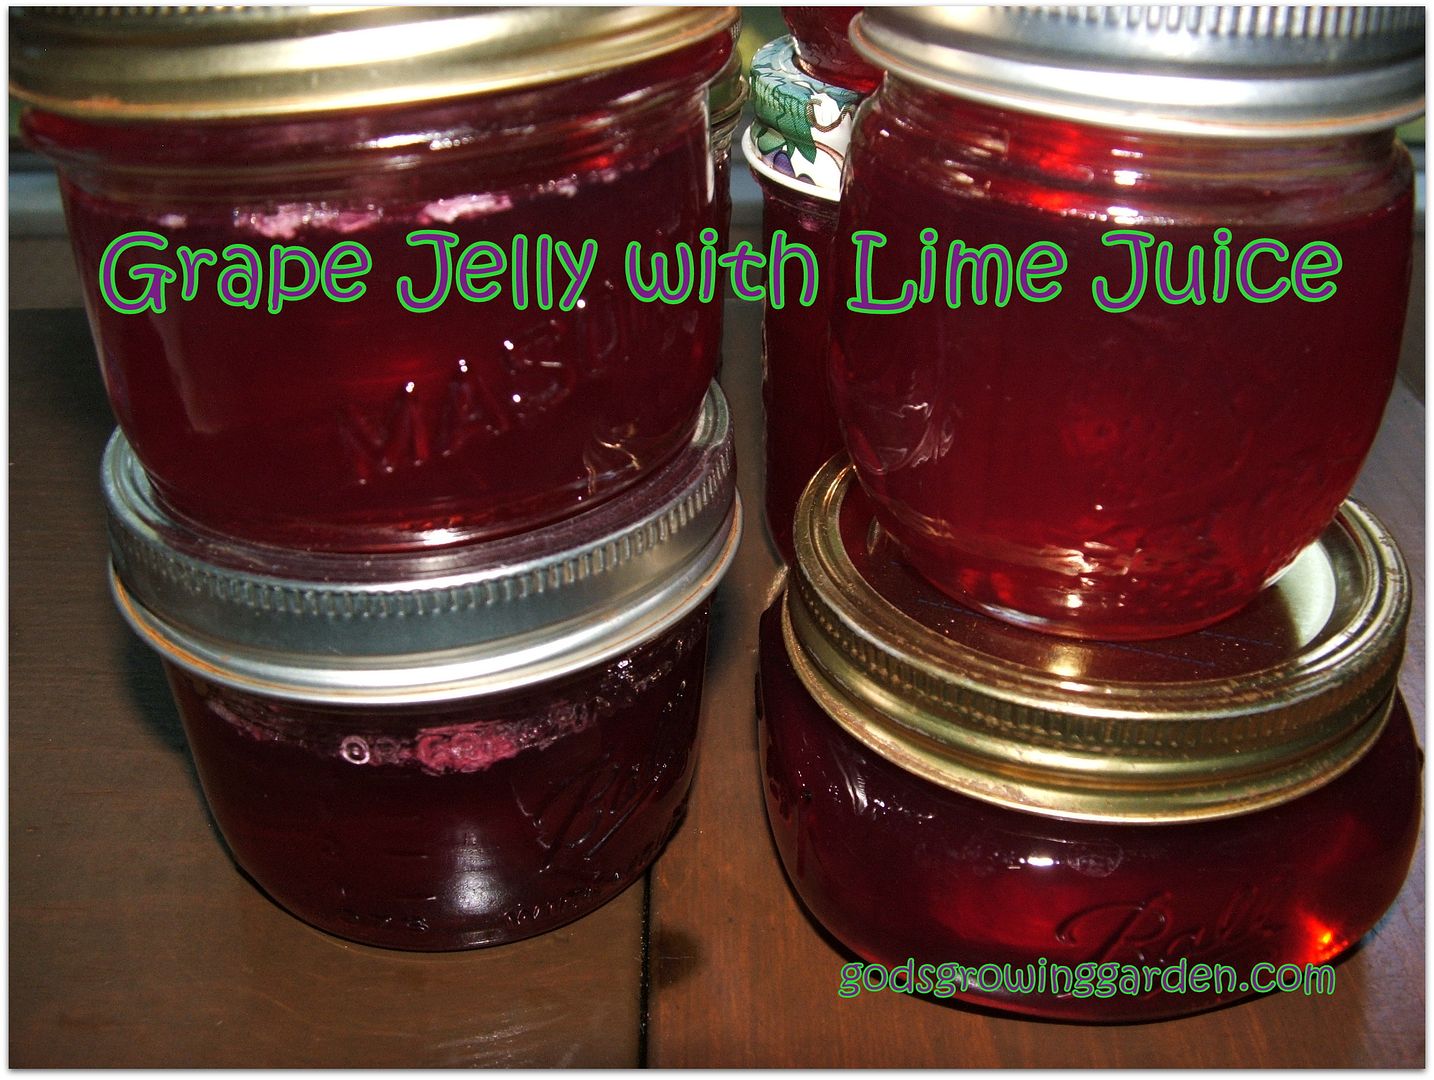 Grape Jelly by Angie Ouellette-Tower for godsgrowinggarden.com photo 004_zps707f3dcc.jpg